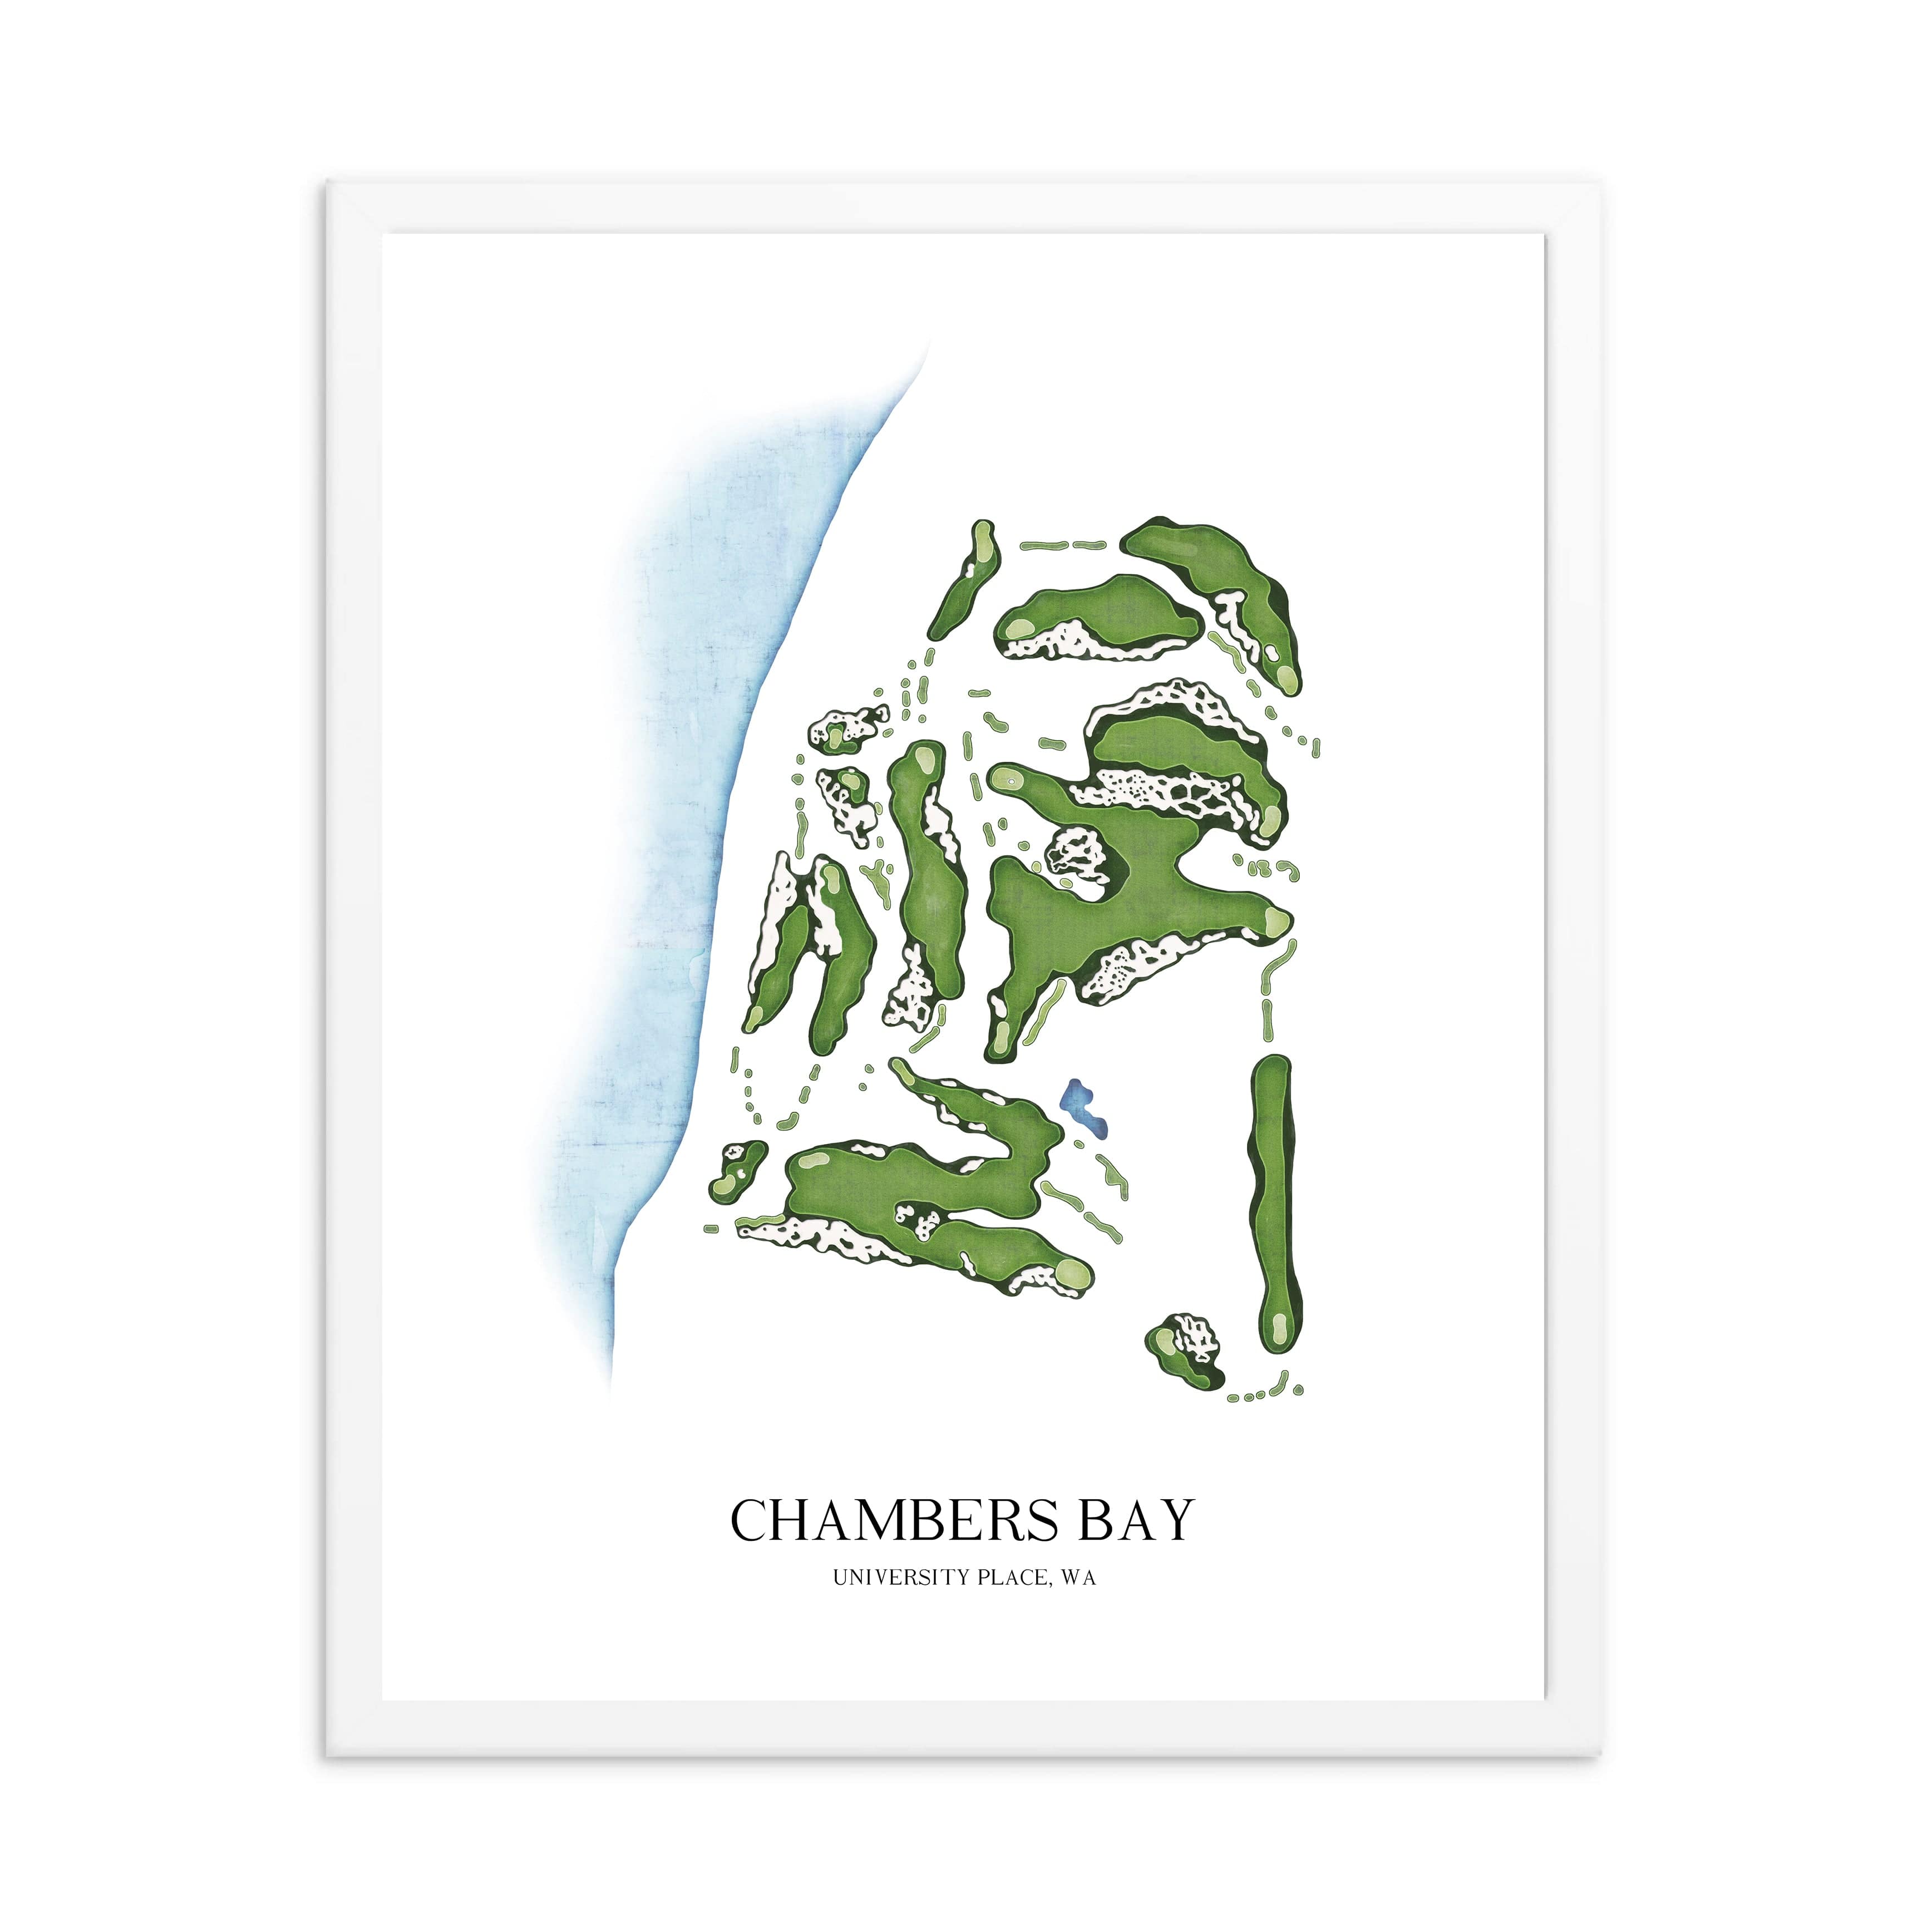 The 19th Hole Golf Shop - Golf Course Prints -  8" x 10" / White Chambers Bay Golf Course Map